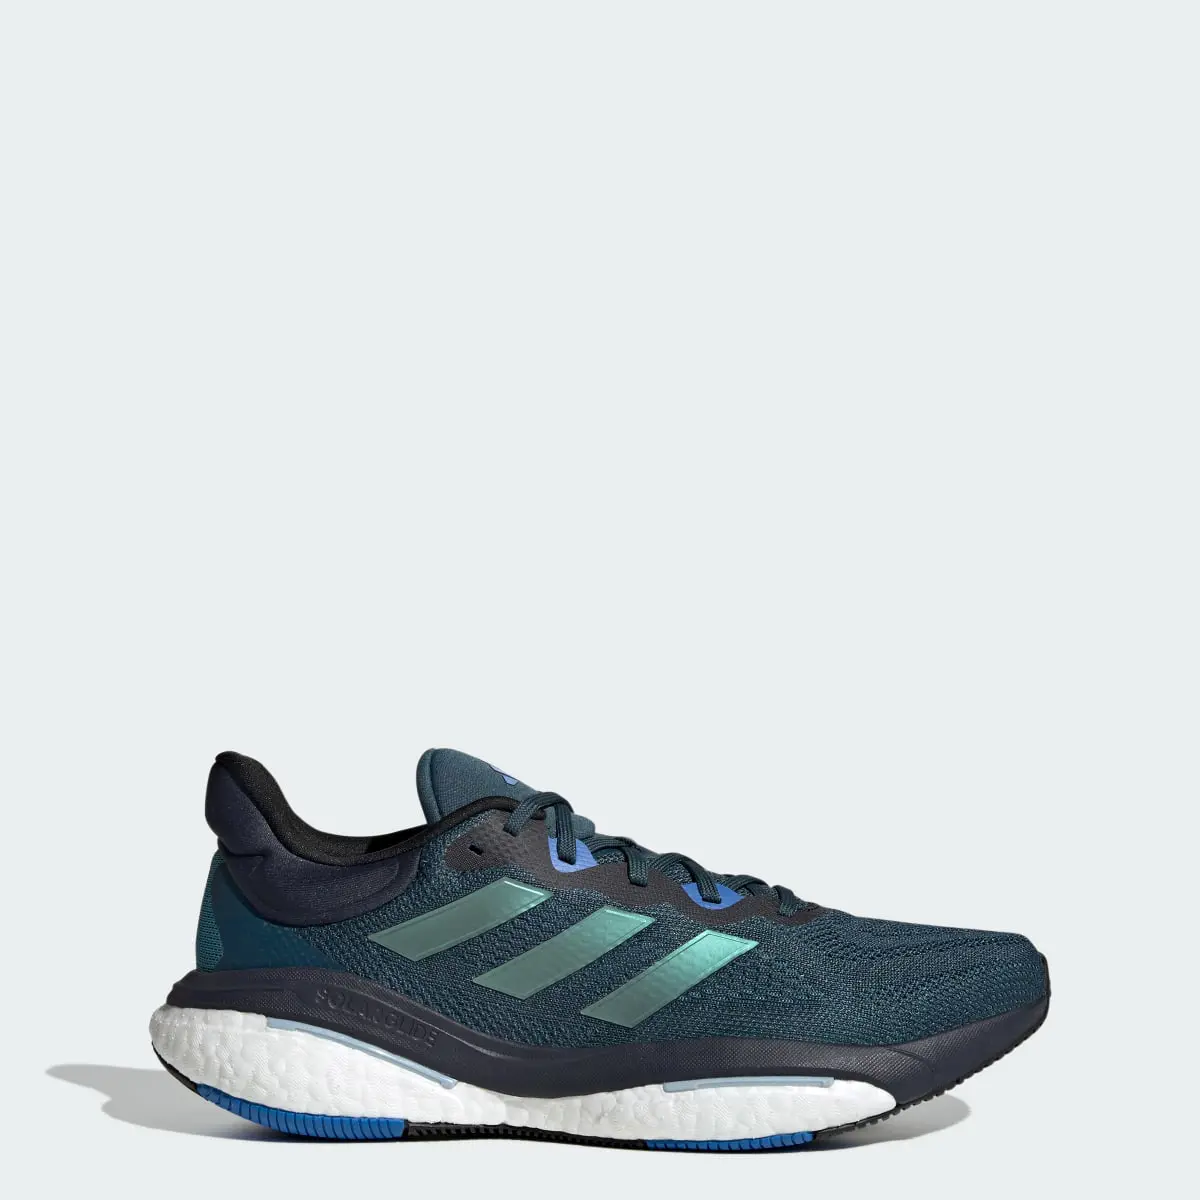 Adidas Solarglide 6 Shoes. 1